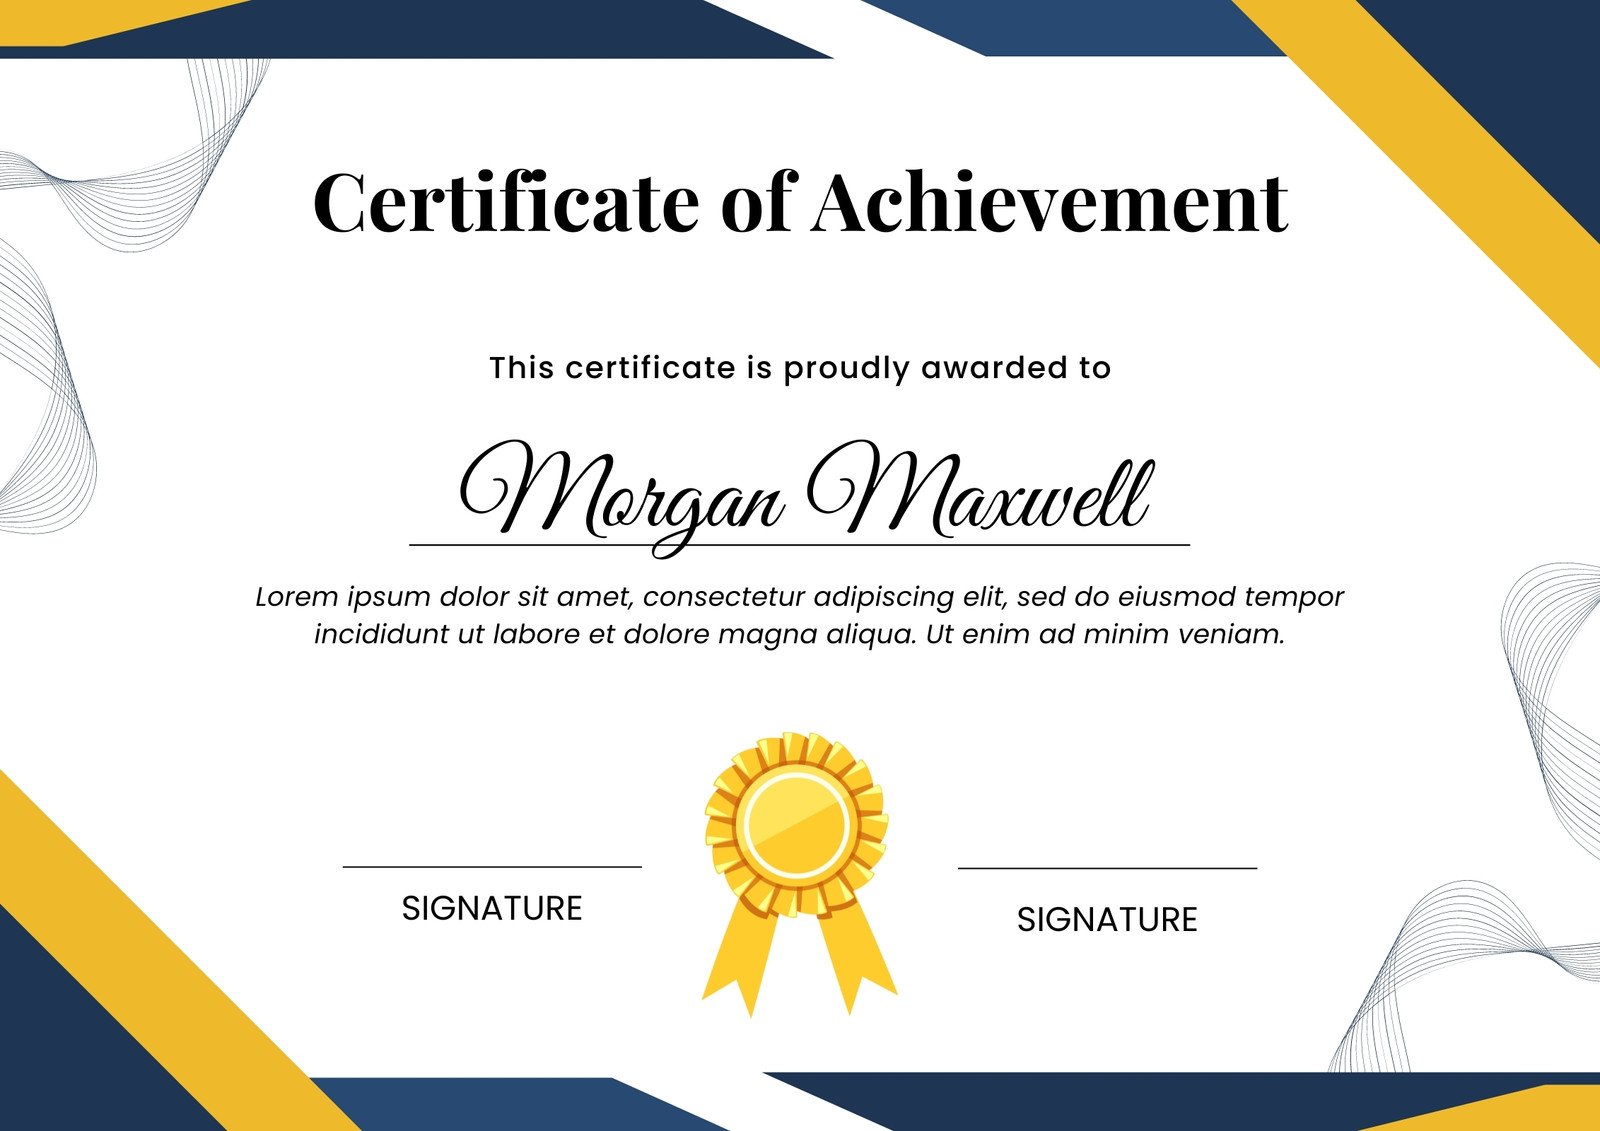 I Owe You Certificate Printable: Get Yours Now For Free Save Money